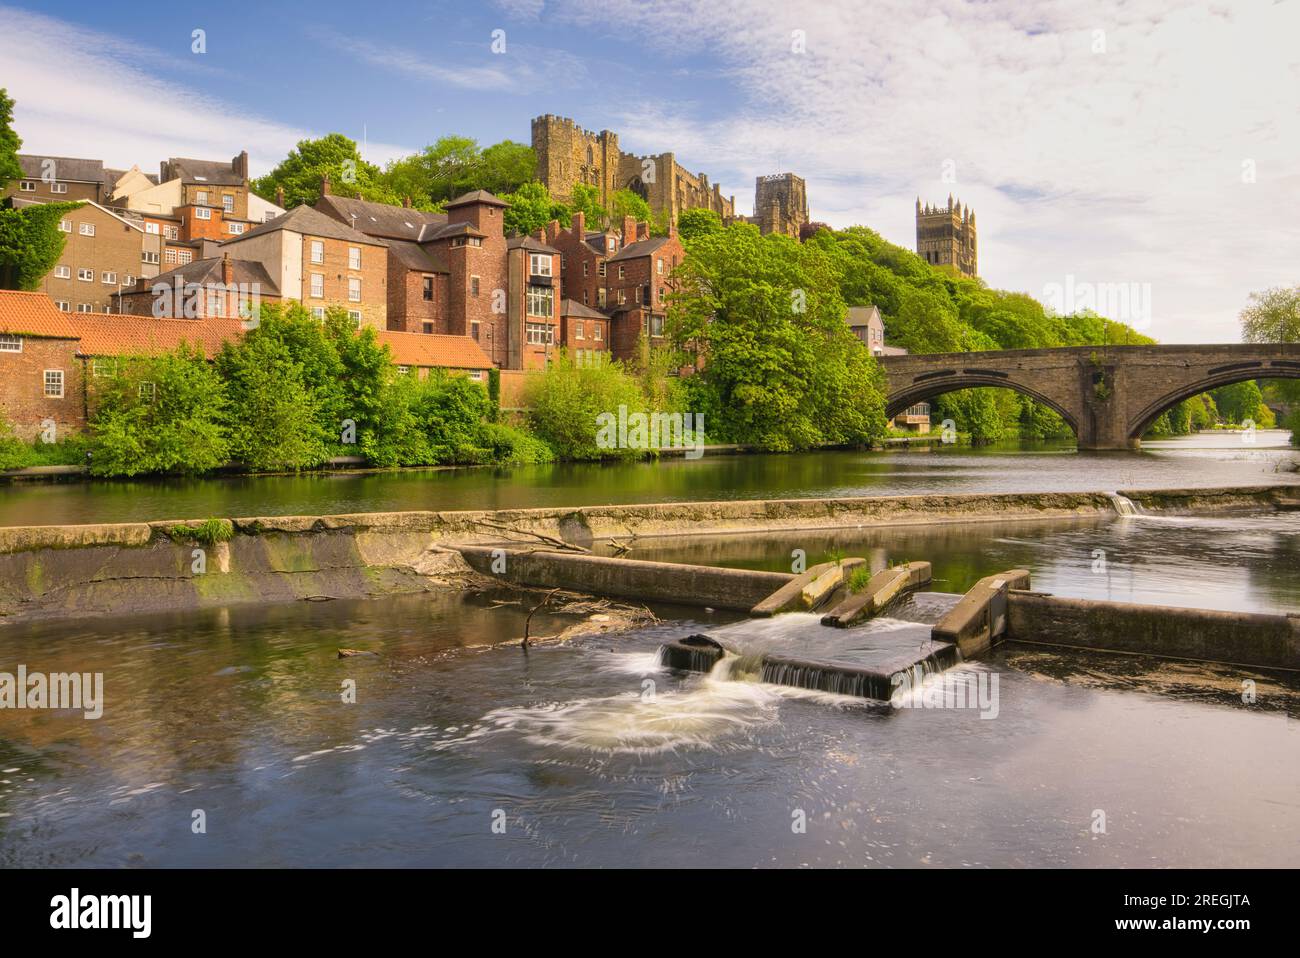 Looking across the River Wear in Durham towards Framwellgate Bridge, Durham Castle and the Cathedral. Stock Photo